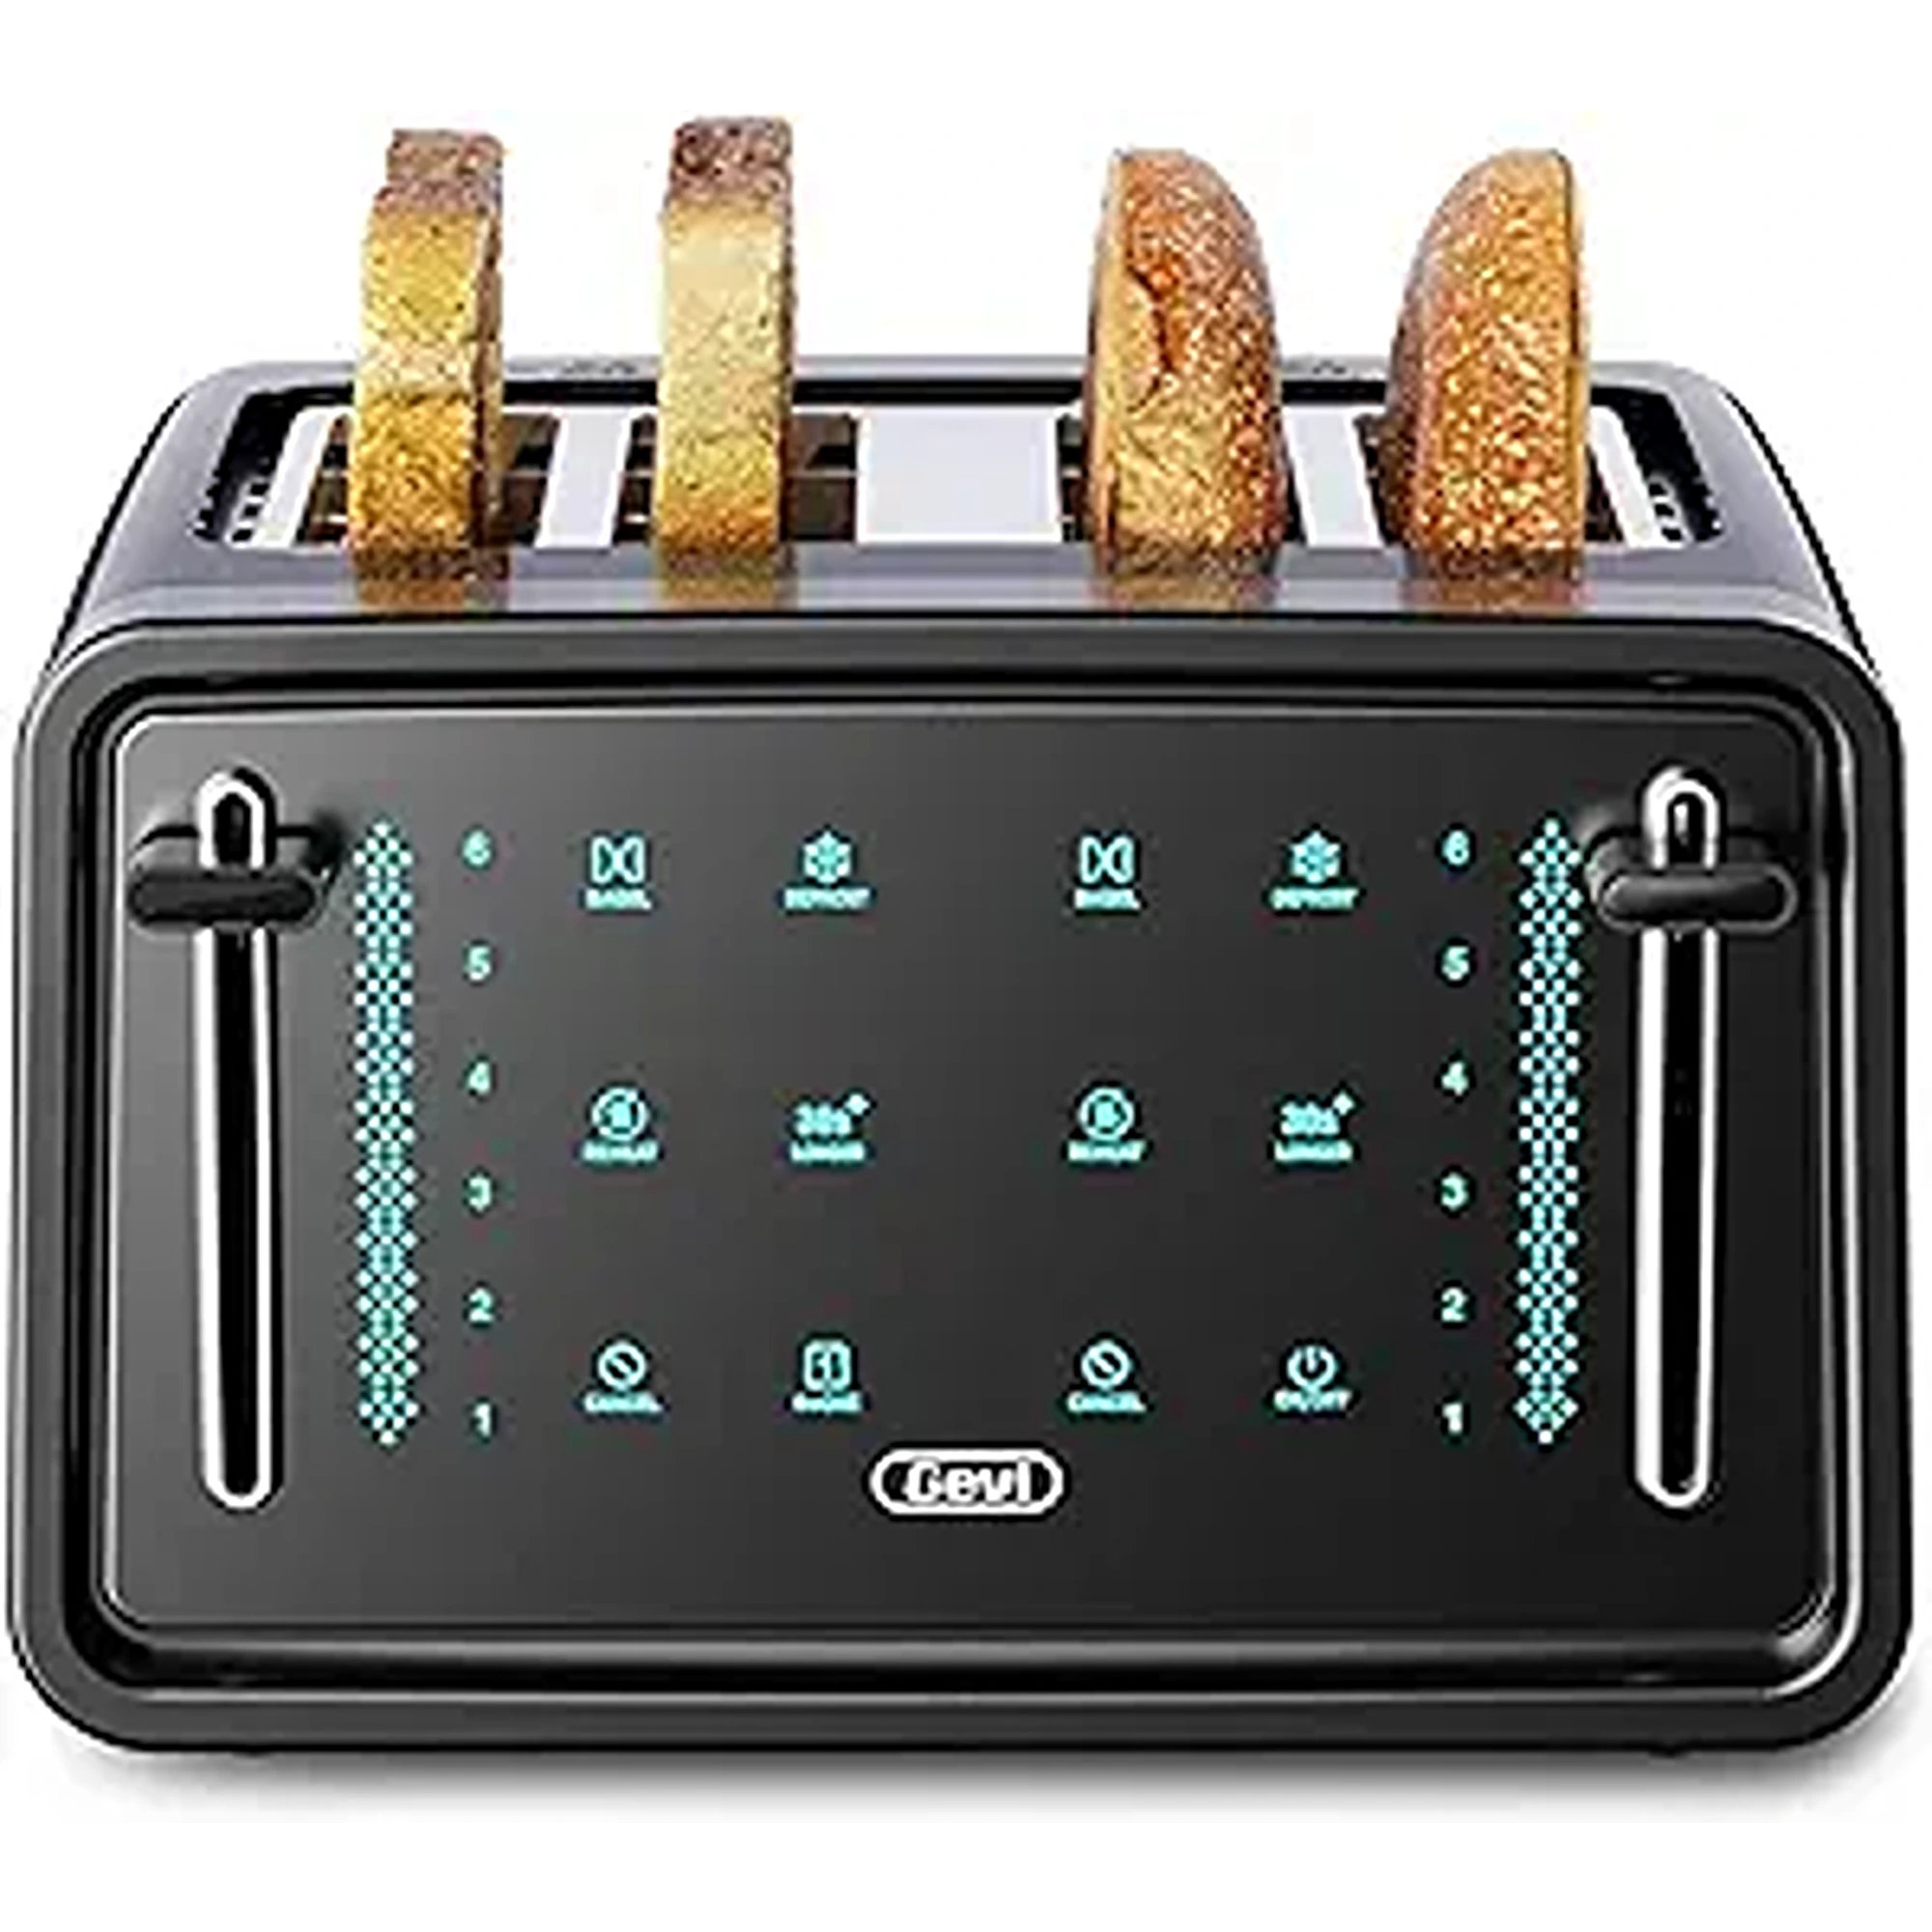 Toaster 4 Slice, Geek Chef Stainless Steel Toaster with Extra Wide Slots, 4  Slot Toaster with Bagel/Defrost/Cancel Function, Dual Control Panel of 6